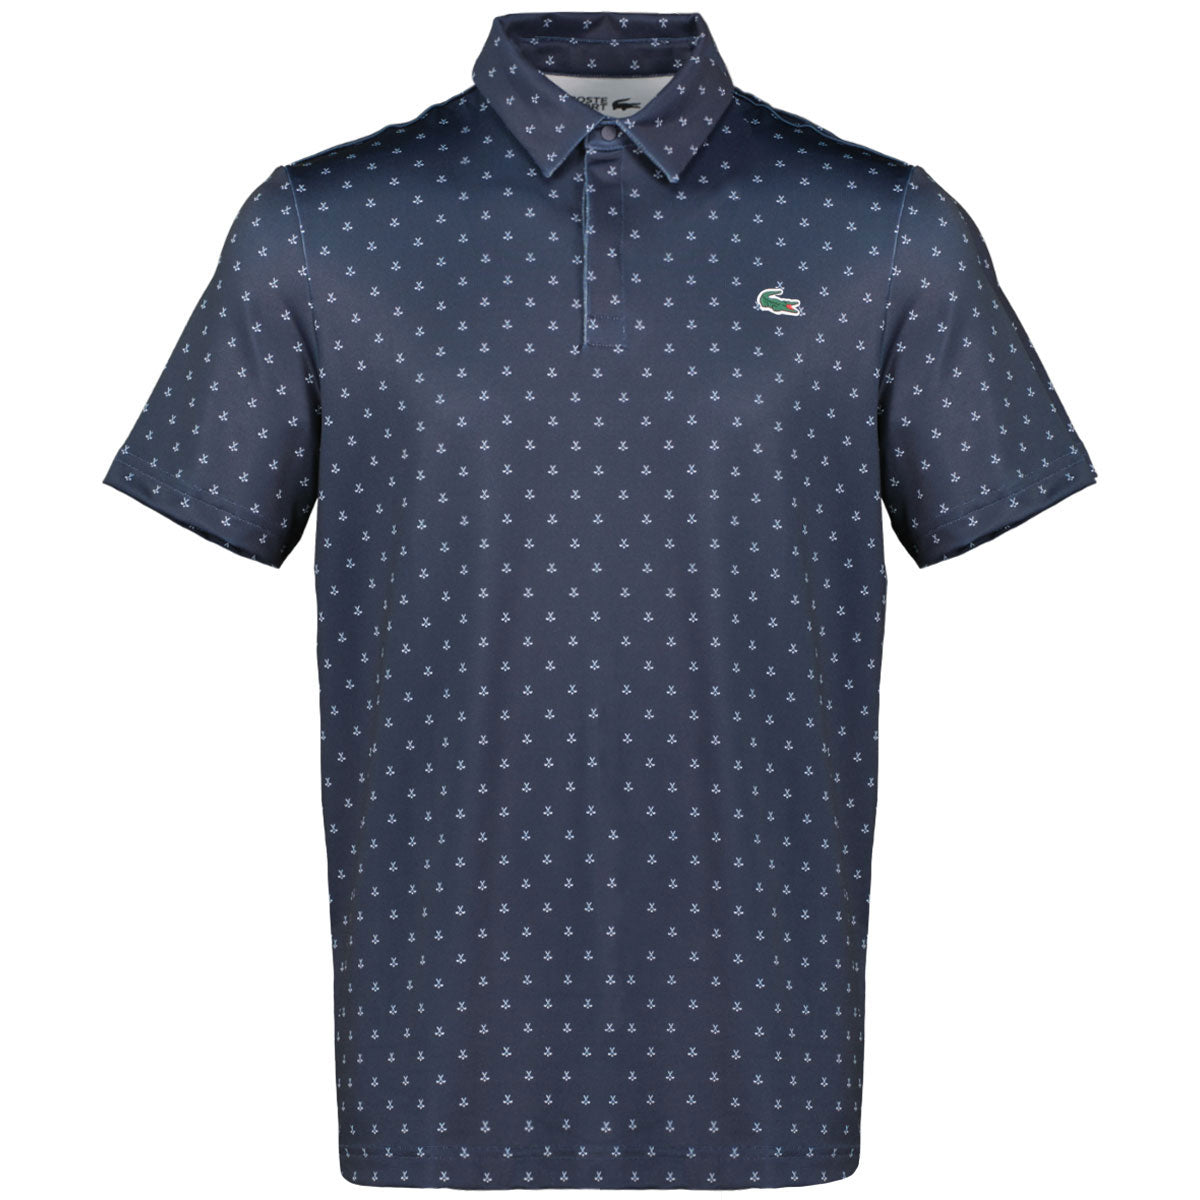 Lacoste All Over Printed Golf Polo Shirt DH5175